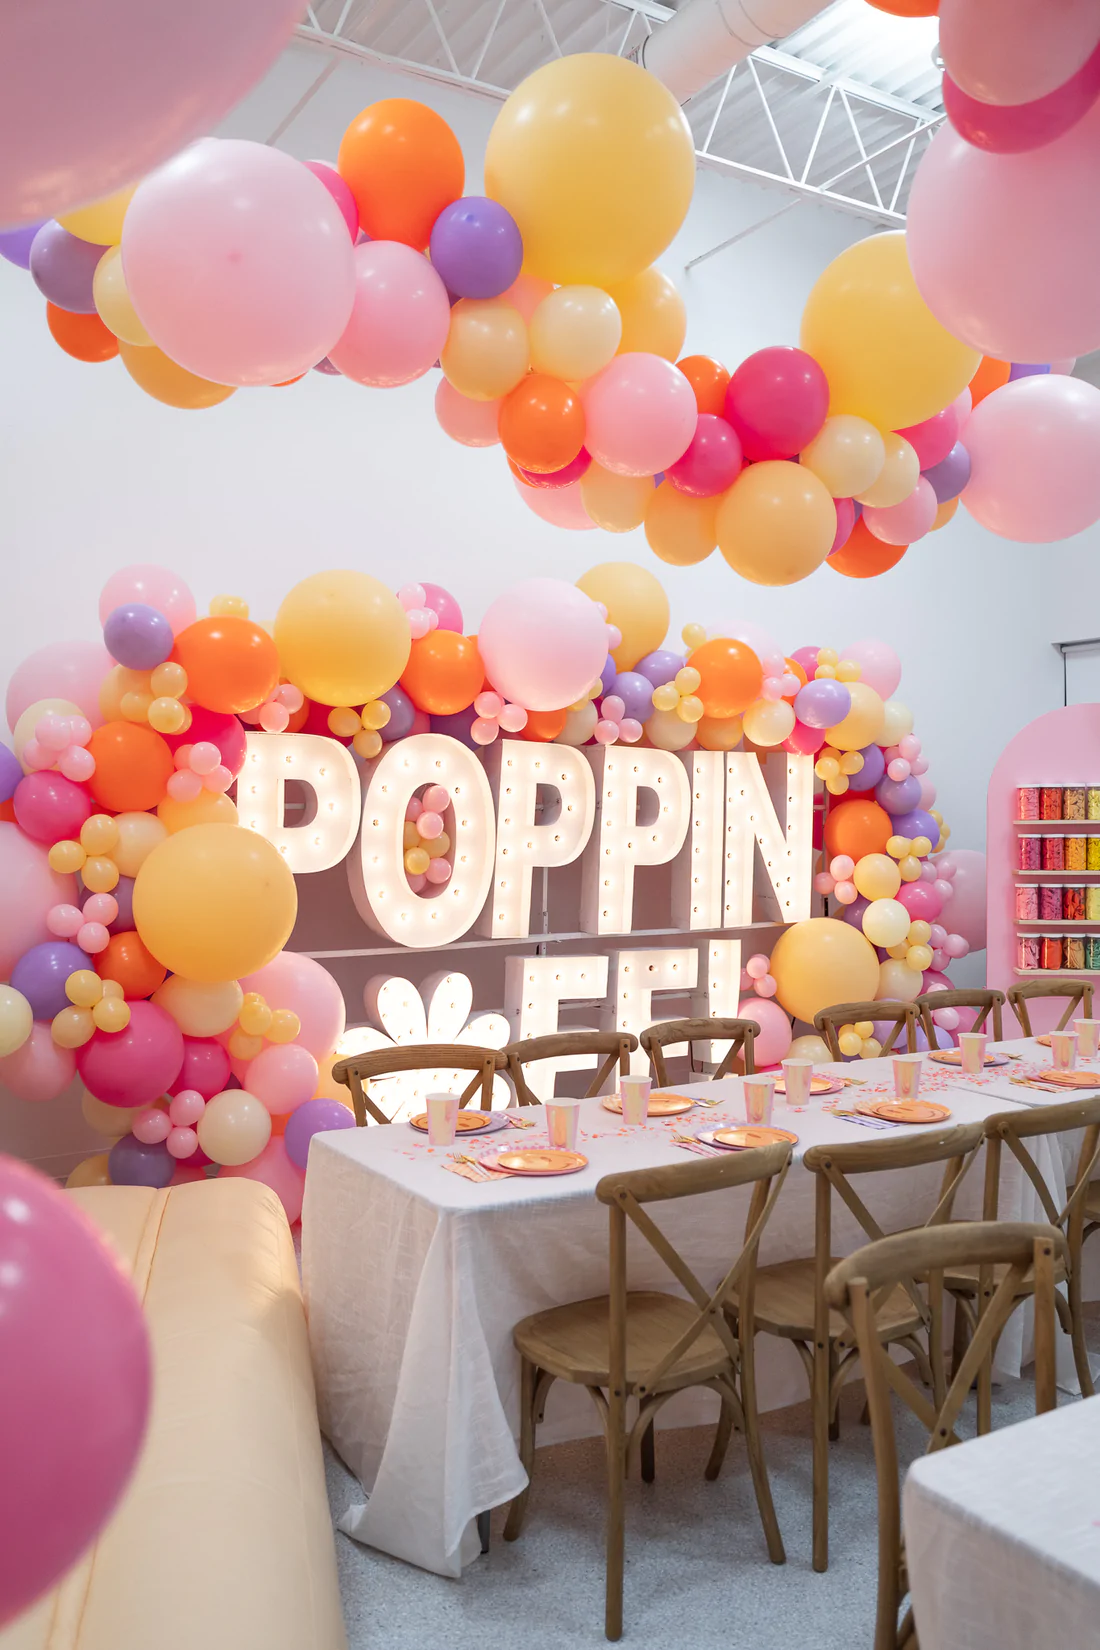 How To Build Basic Backdrop Arches For Your Next Party!